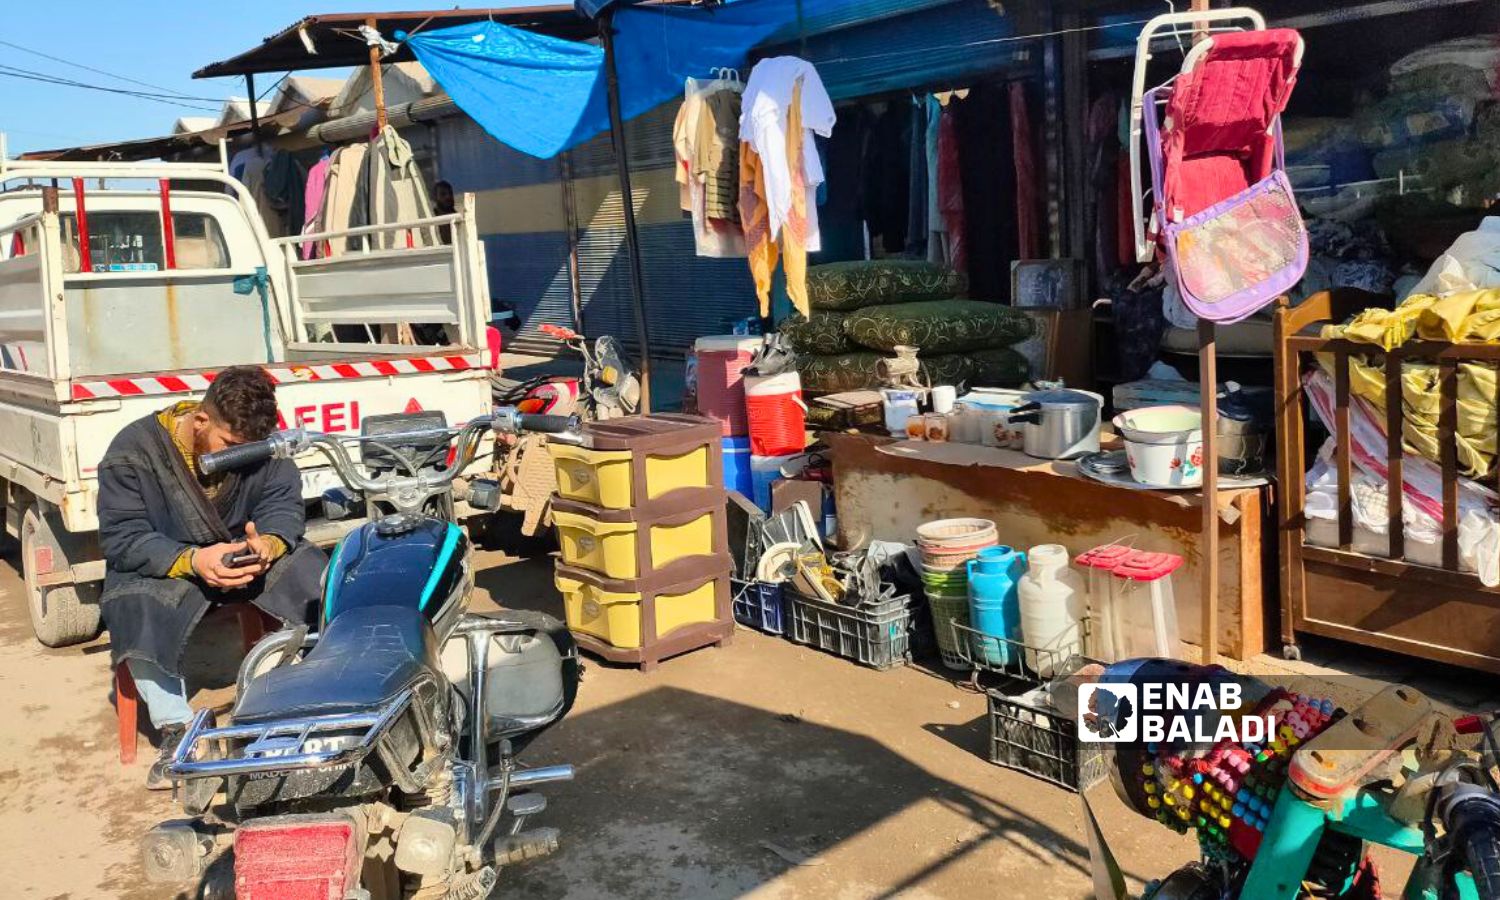 Vendors in the "Thieves Market" display their goods at low prices as they are used and sometimes damaged, requiring repair - January 25, 2024 (Enab Baladi/ Majd al-Salem)
